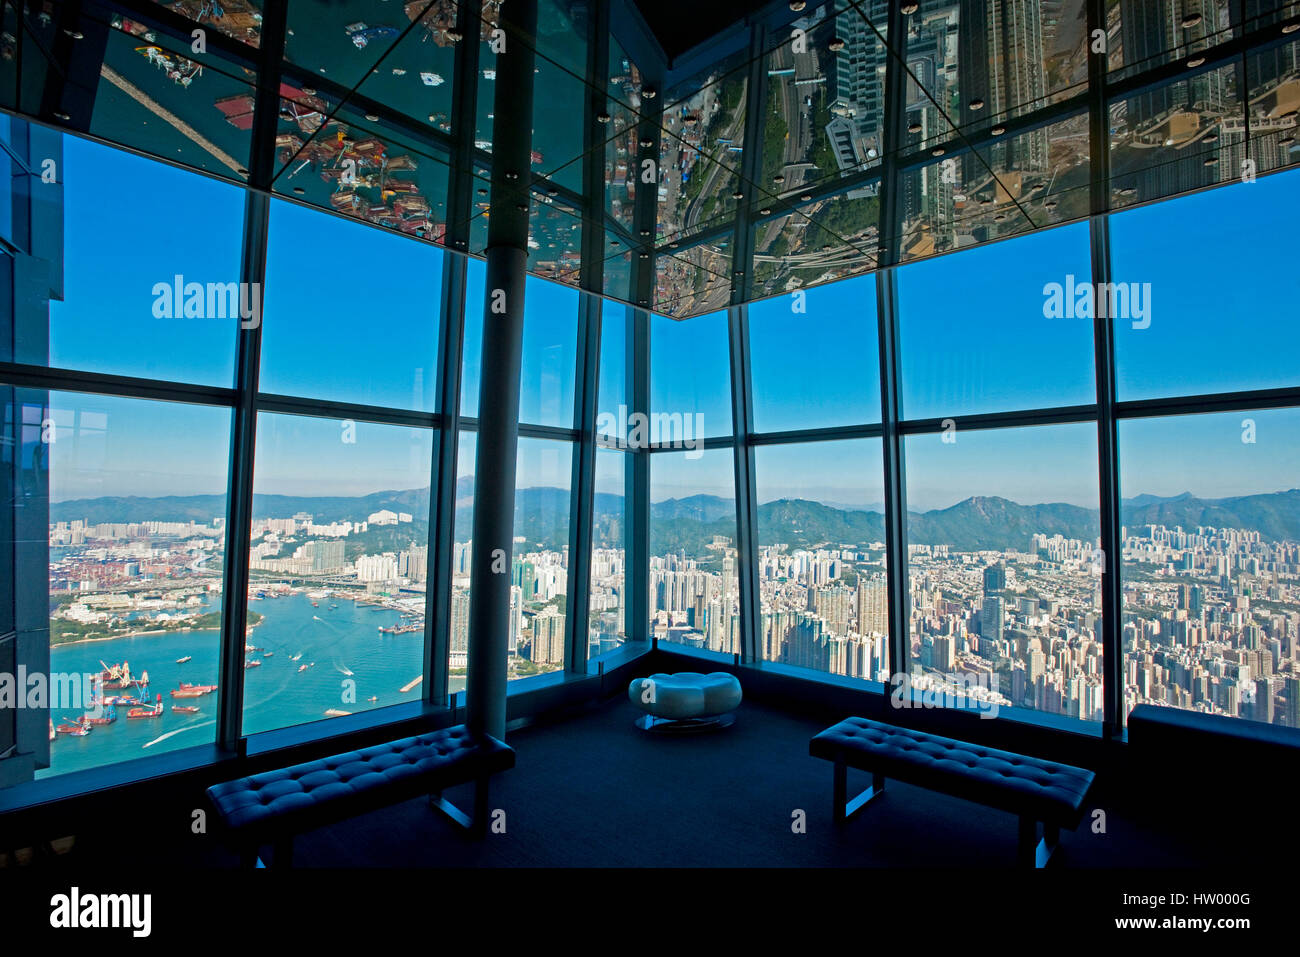 A cityscape view of Hong Kong taken from inside the Sky100 observation deck on the 100th floor of the ICC building. Stock Photo